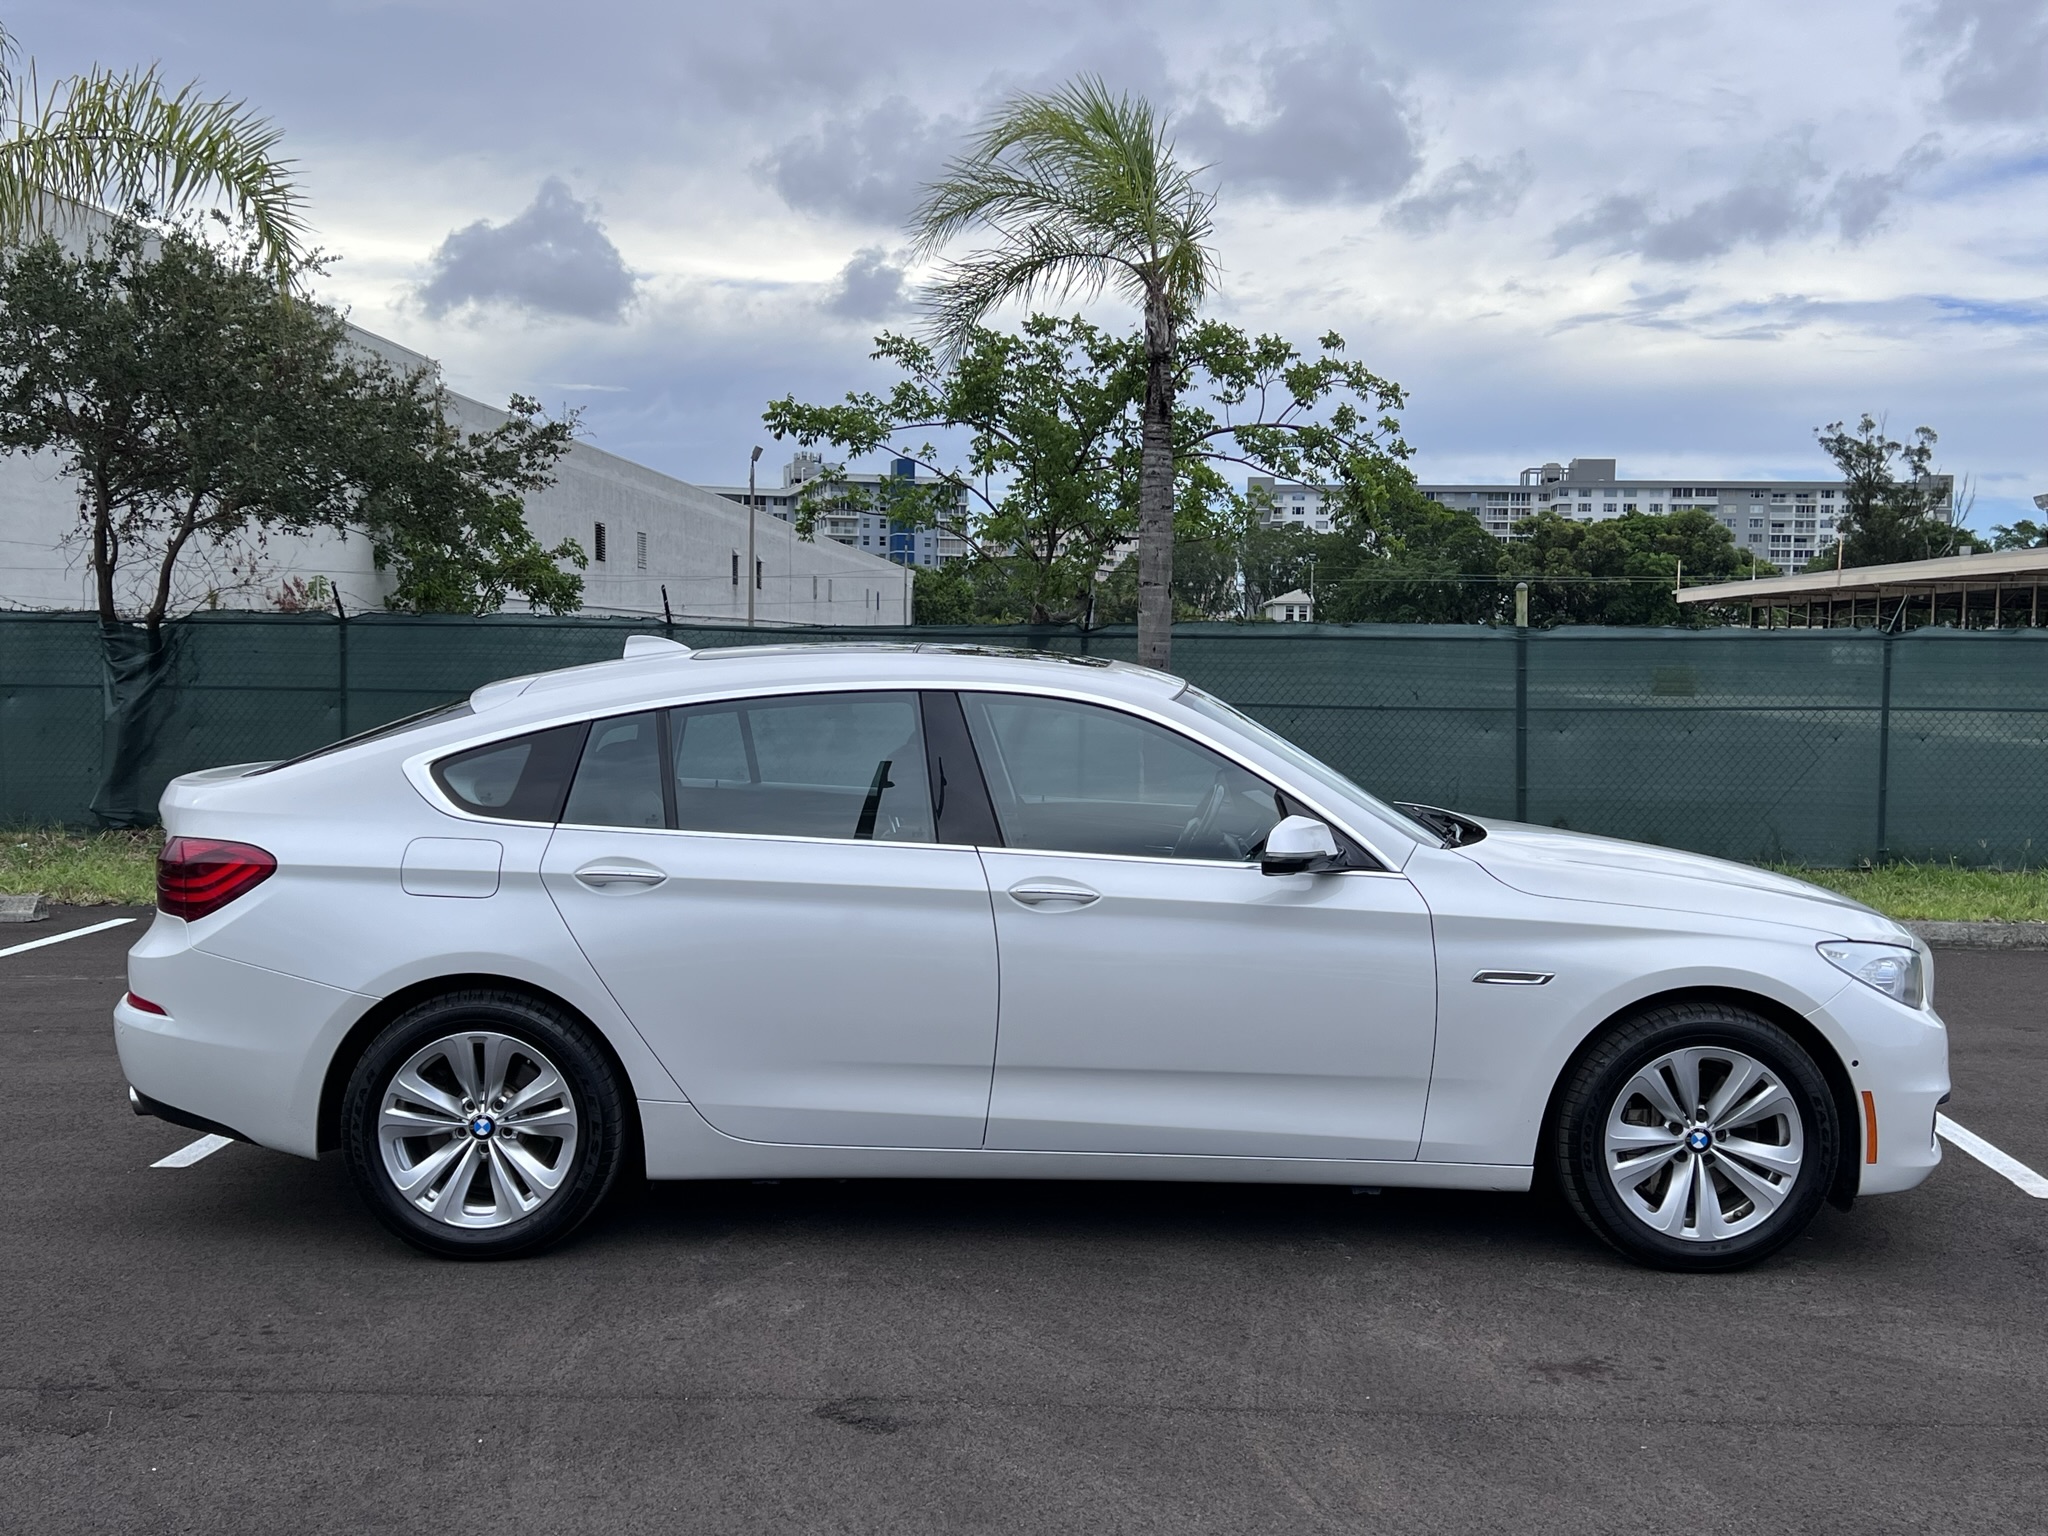 Buy Used 2015 BMW 535I GT for $18 900 from trusted dealer in Brooklyn, NY!